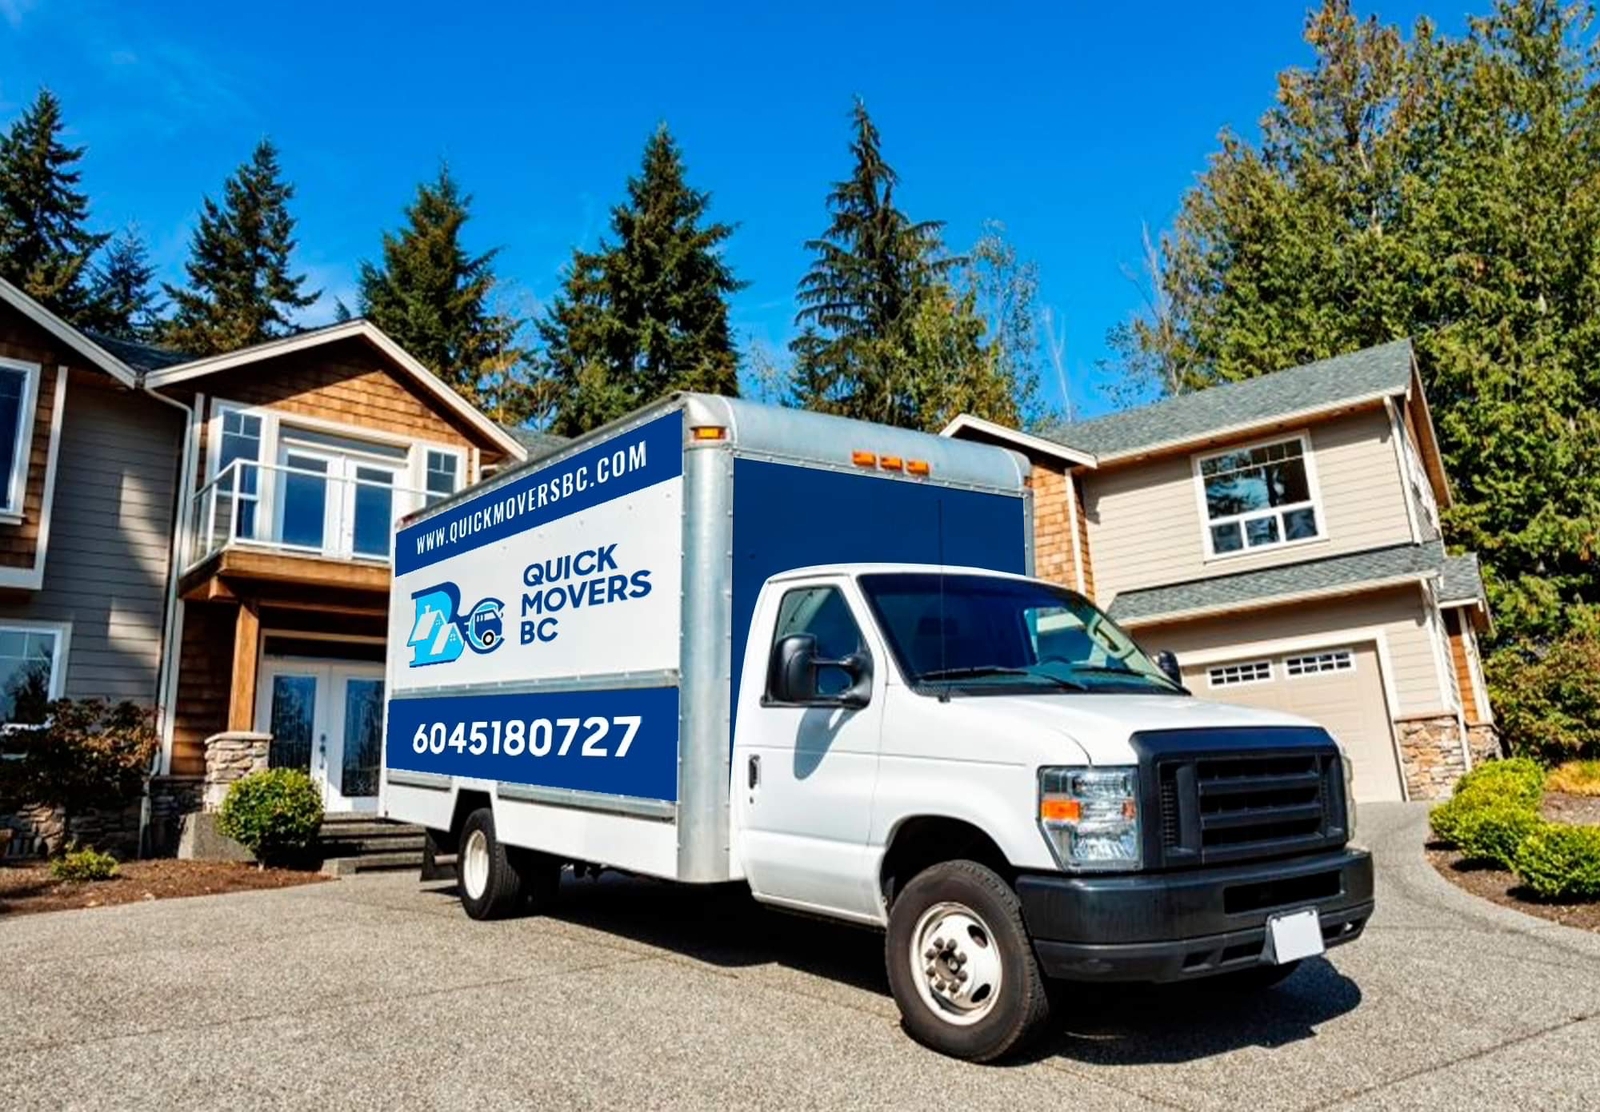 Long Distance Moving Service